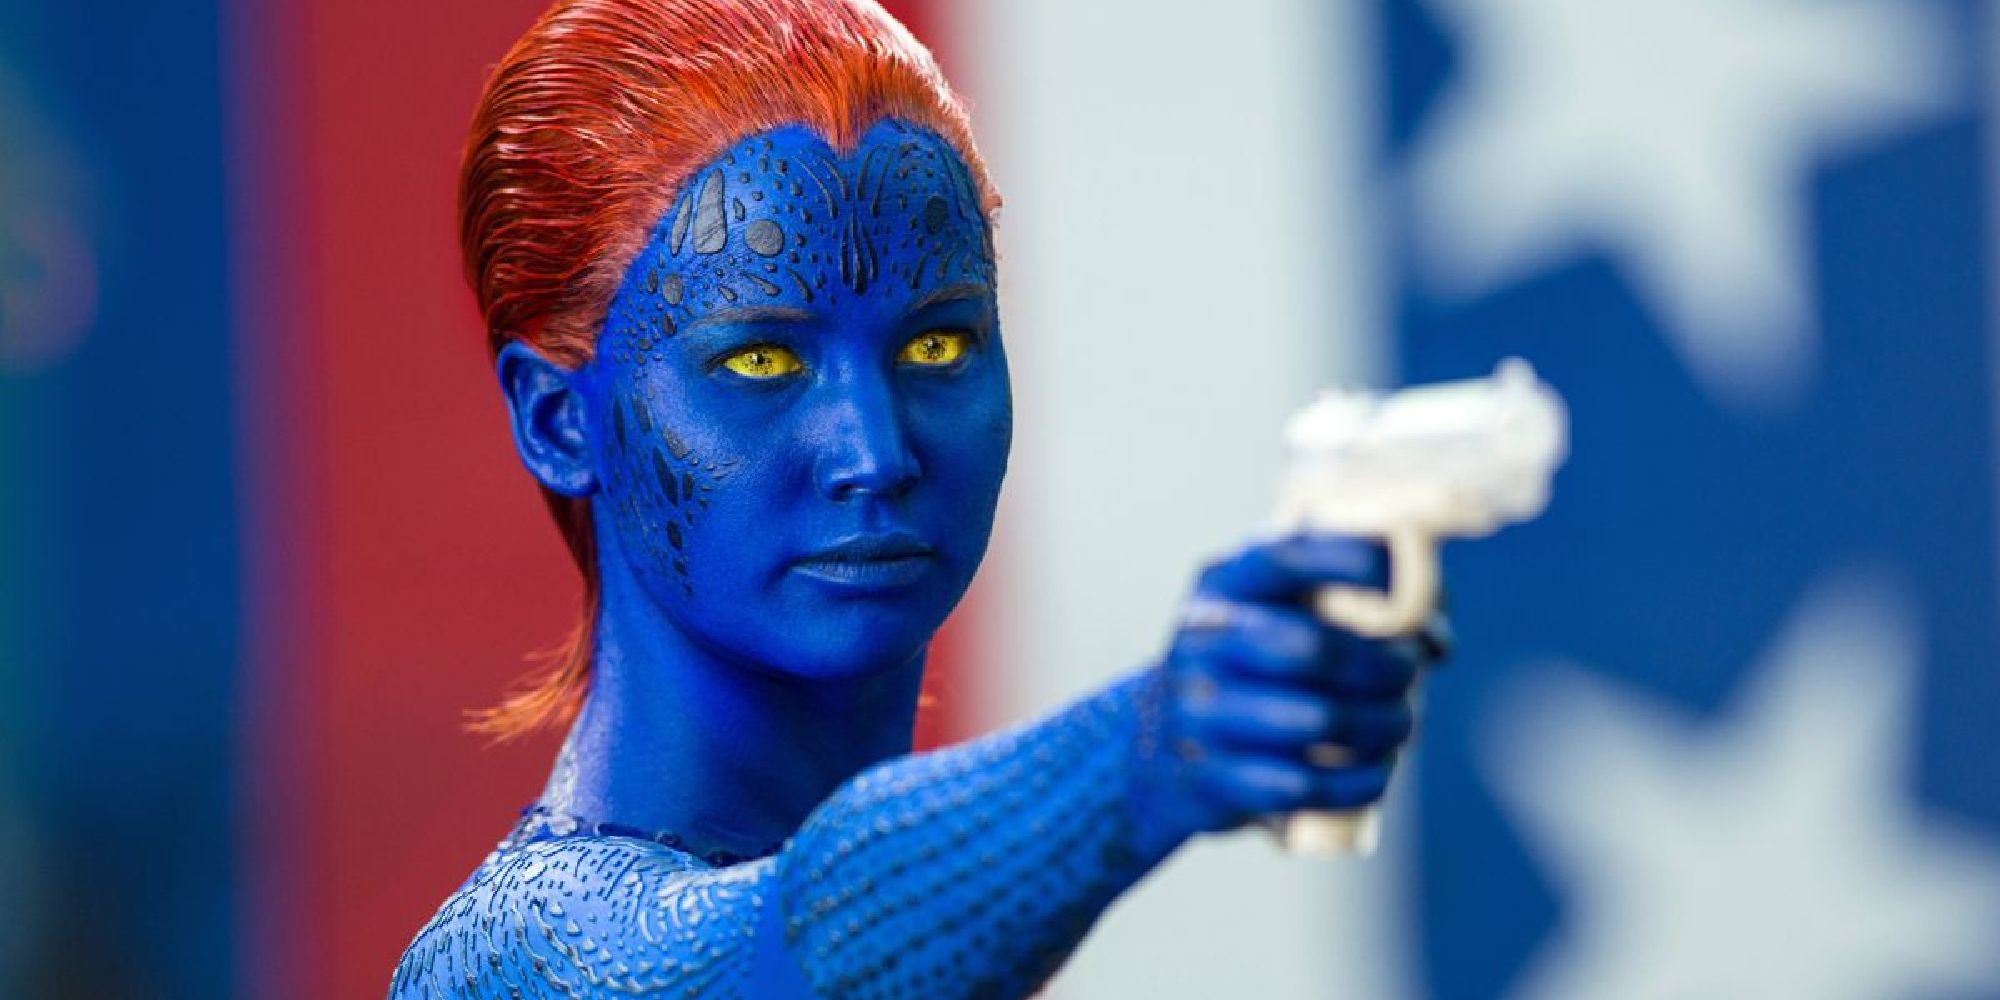 Jennifer Lawrence as Mystique holding a white gun in front of the American flag in Days of Future Past